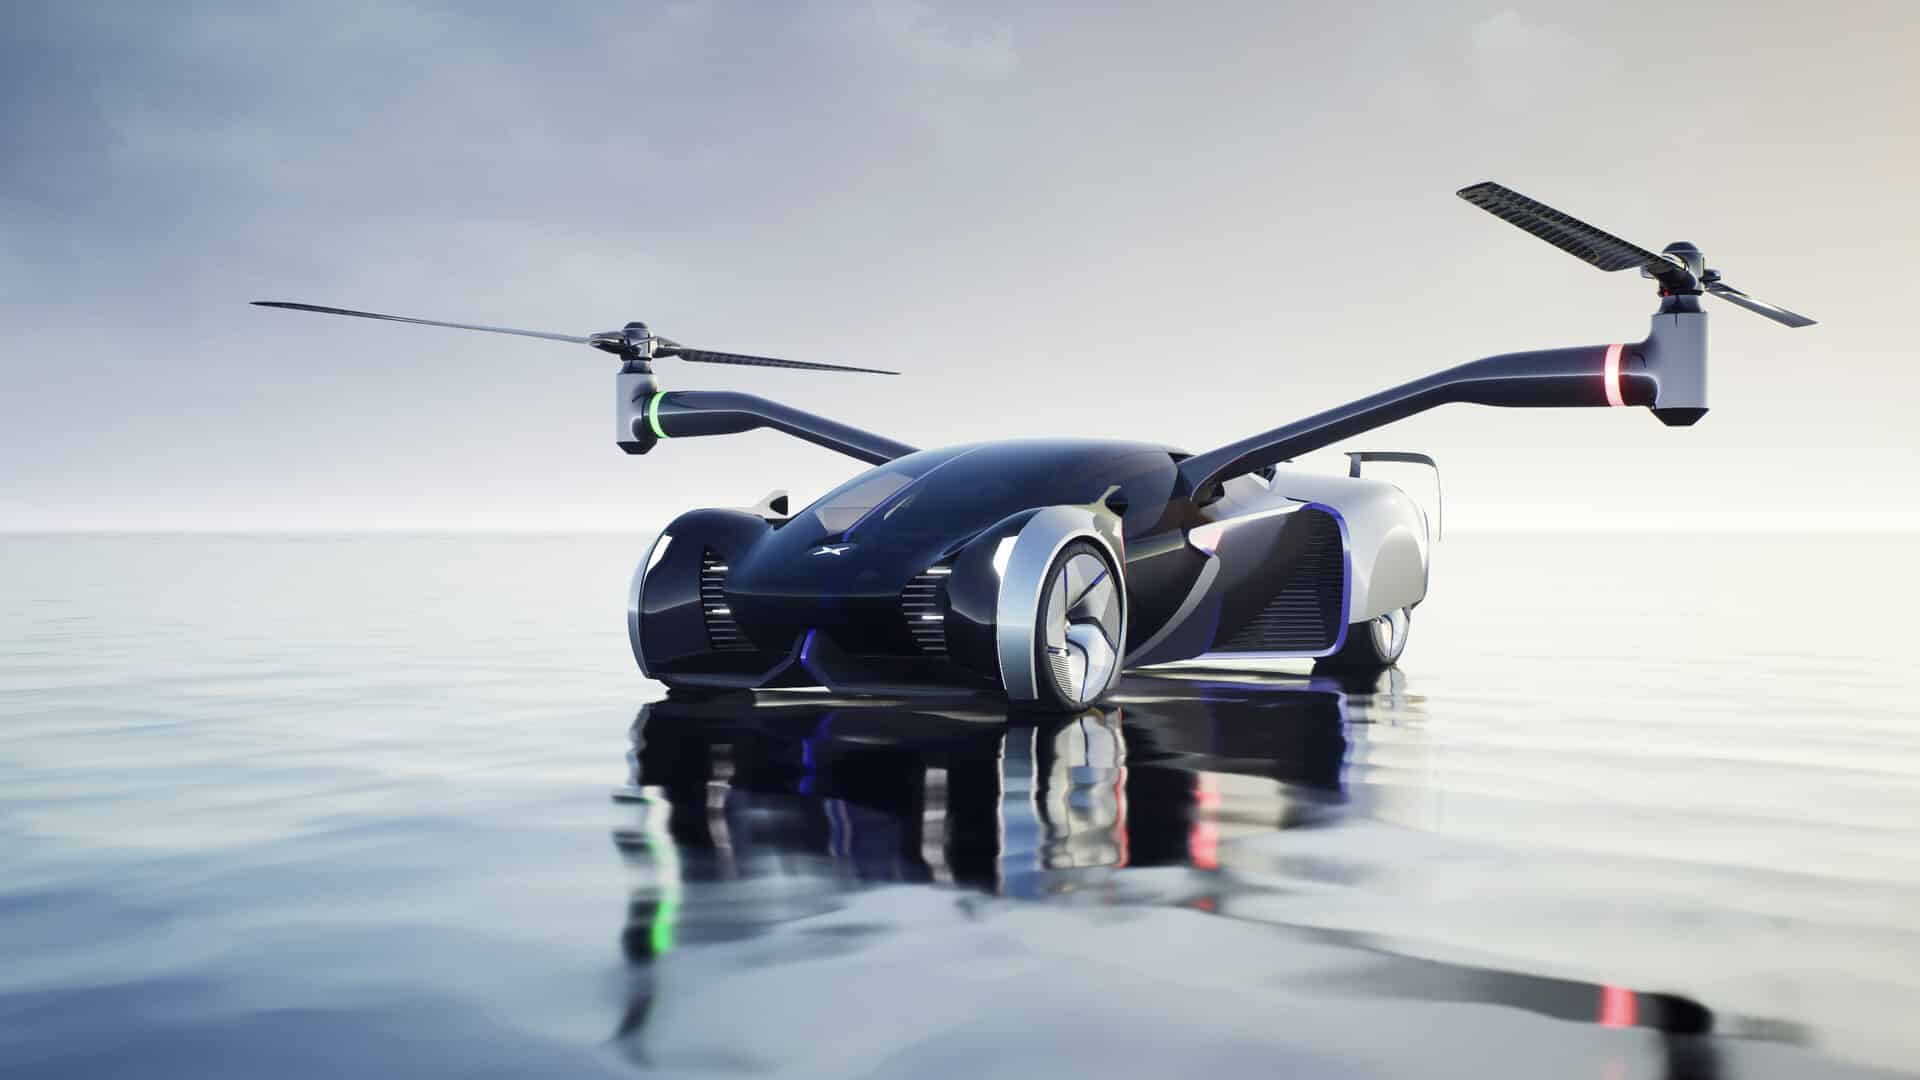 HT Aero secures USD 500 million to develop flying car by 2024